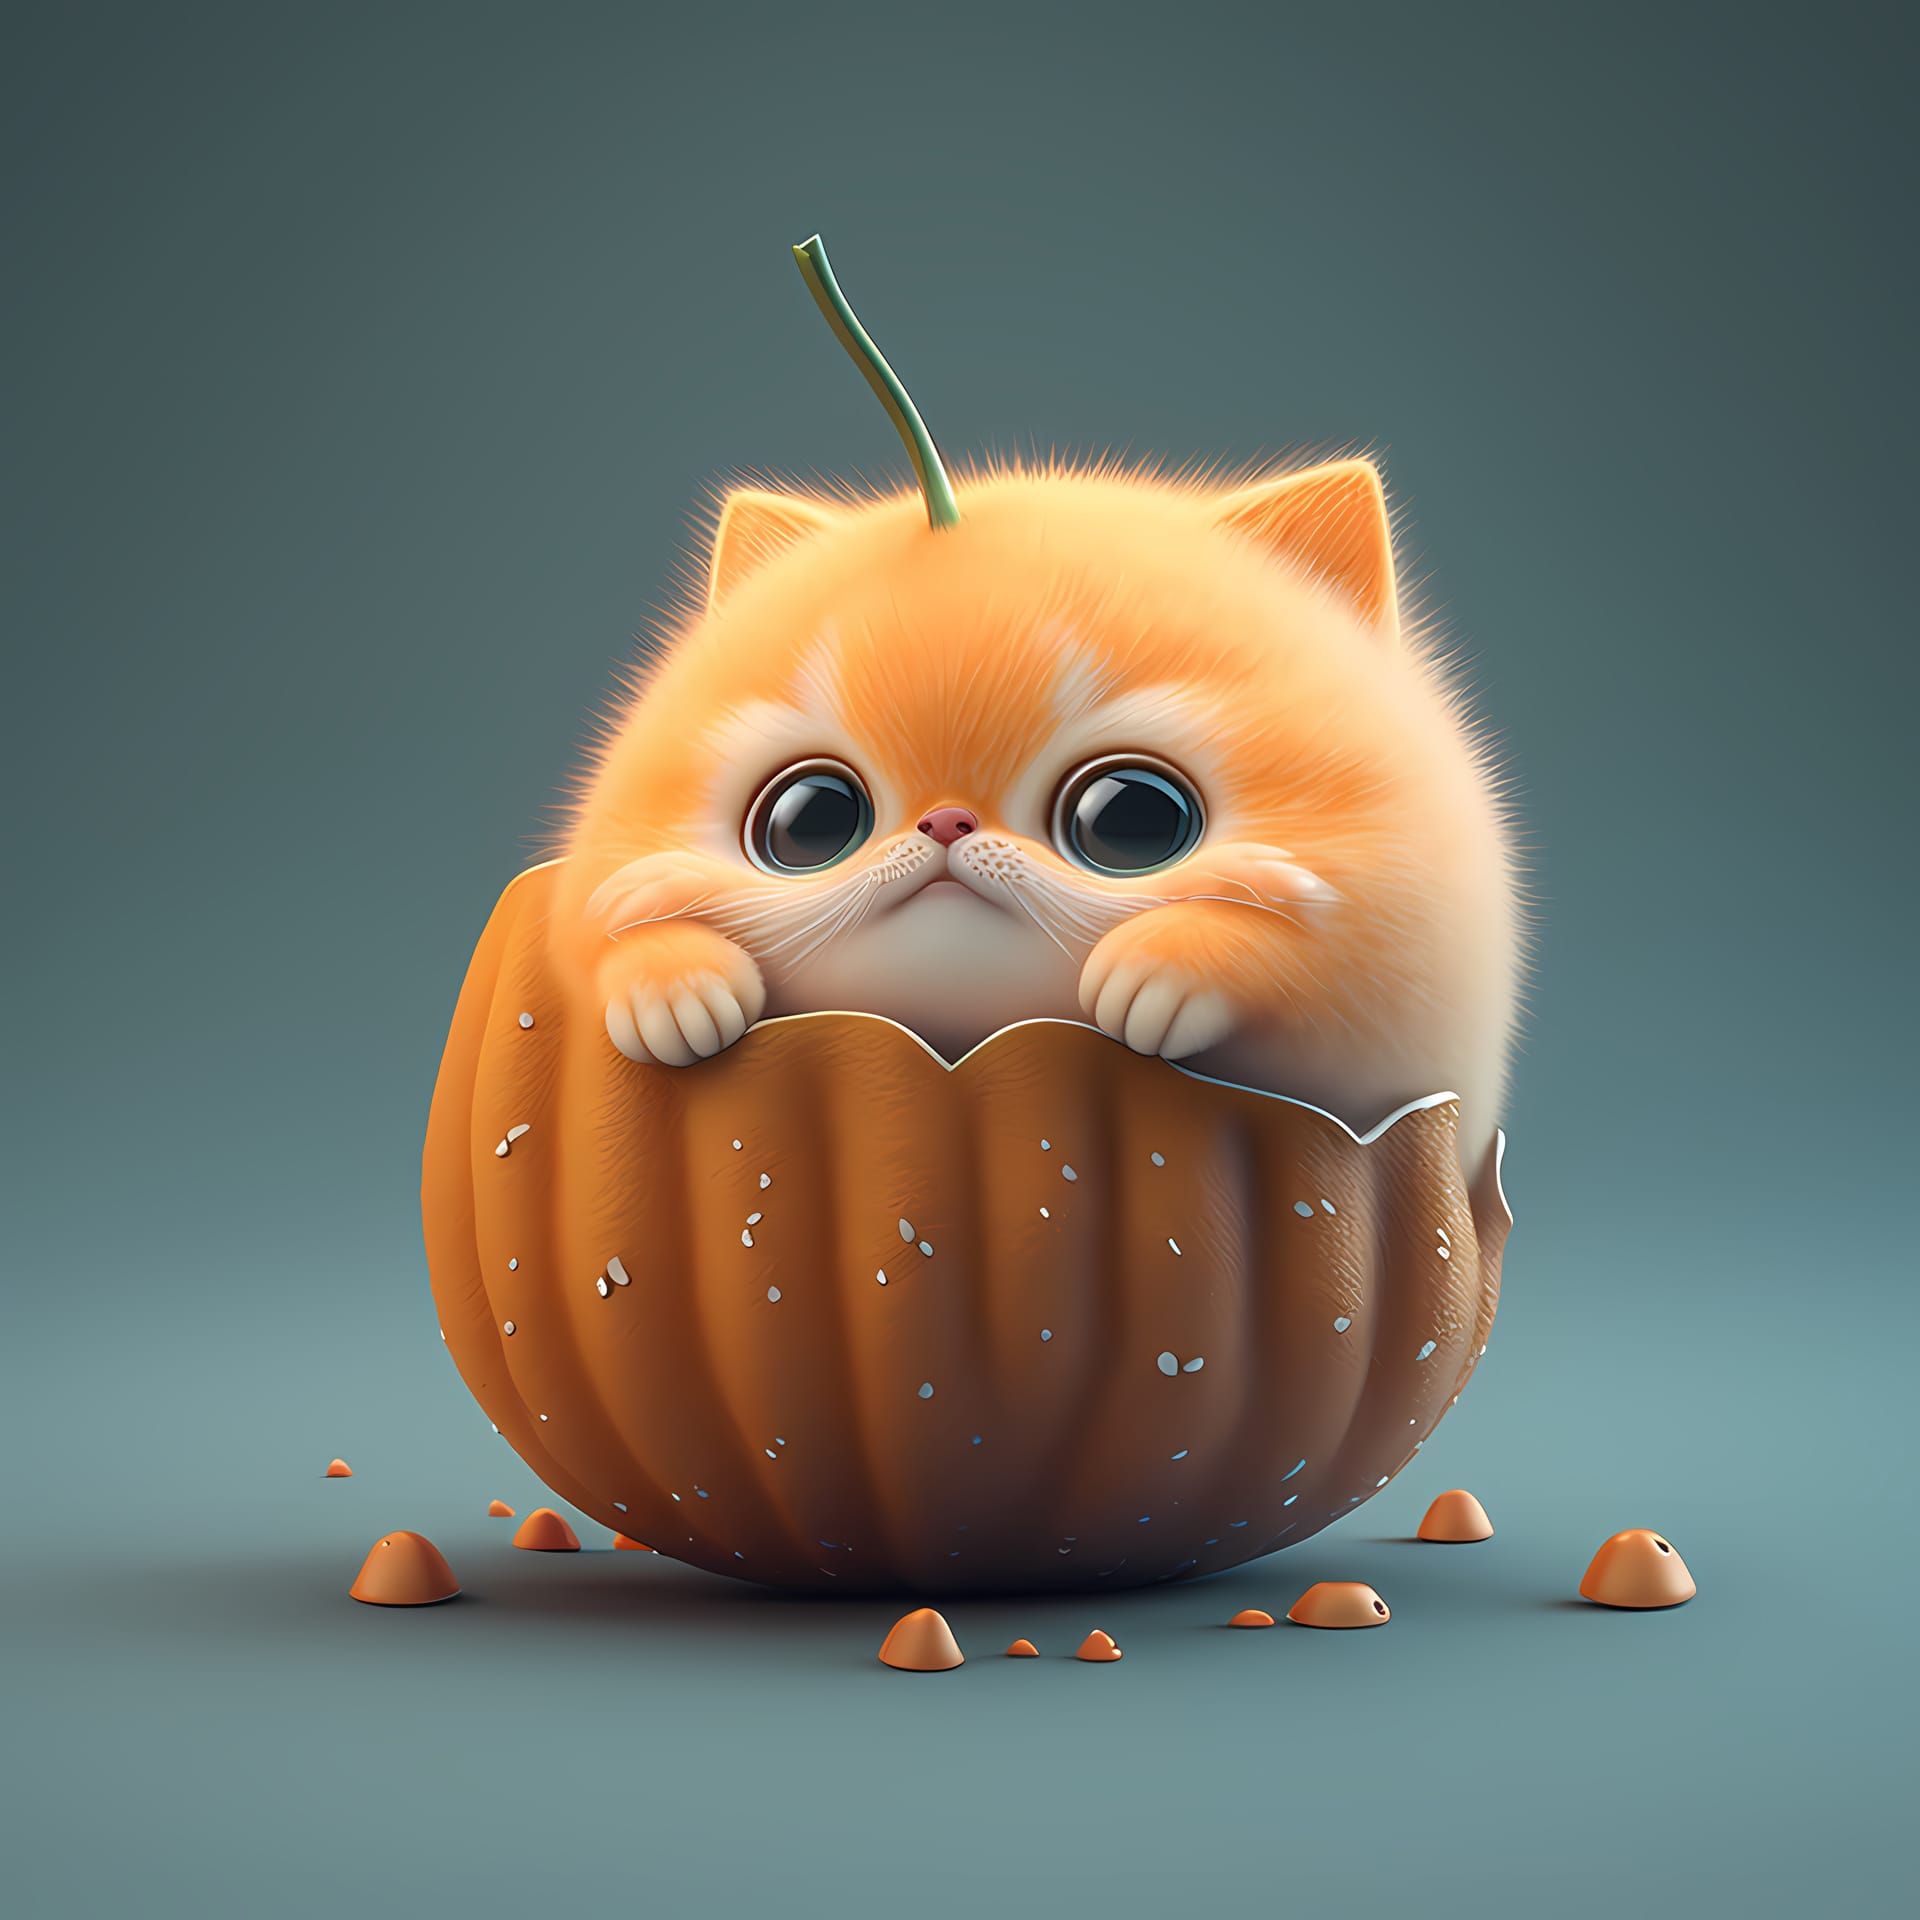 Adorable cute chubby cat 3d render colorful image